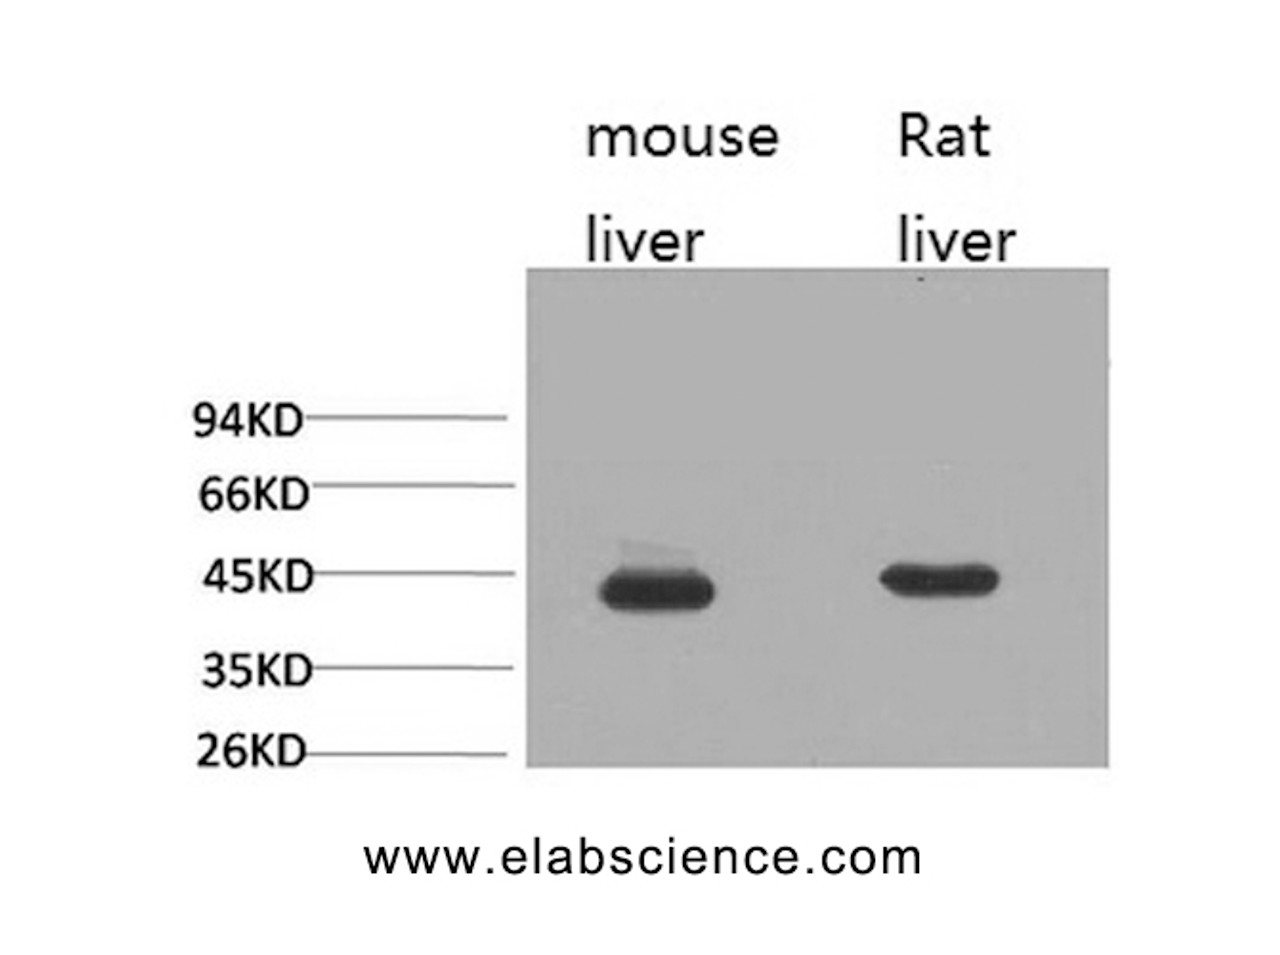 Western Blot analysis of 1) Mouse liver, 2) Rat liver with HAO1 Monoclonal Antibody.